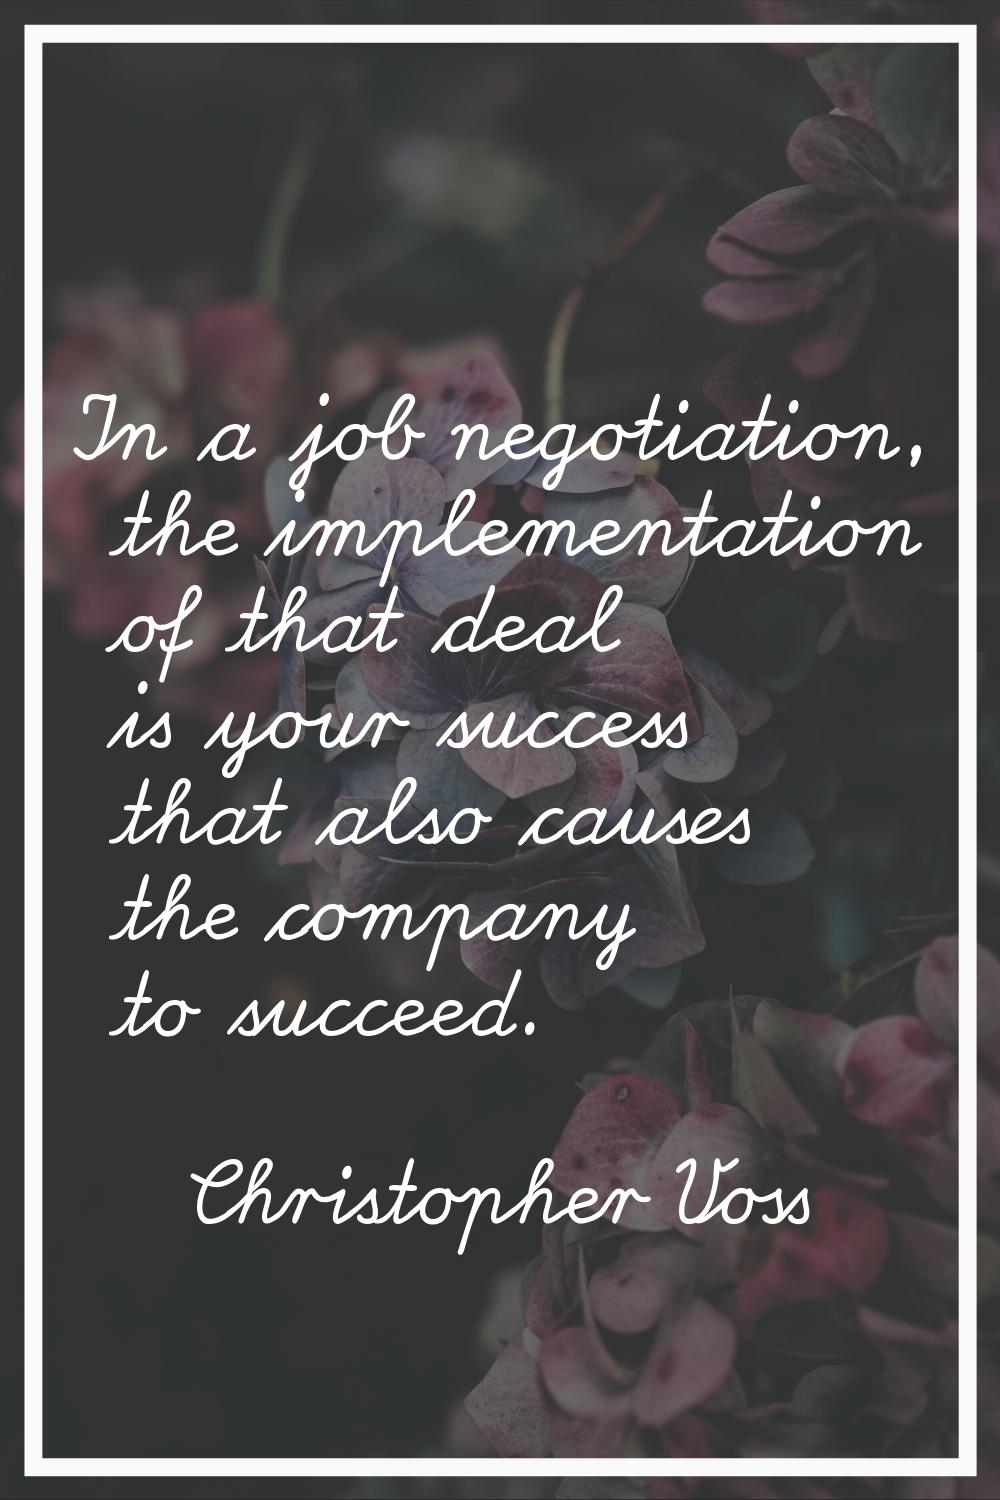 In a job negotiation, the implementation of that deal is your success that also causes the company 